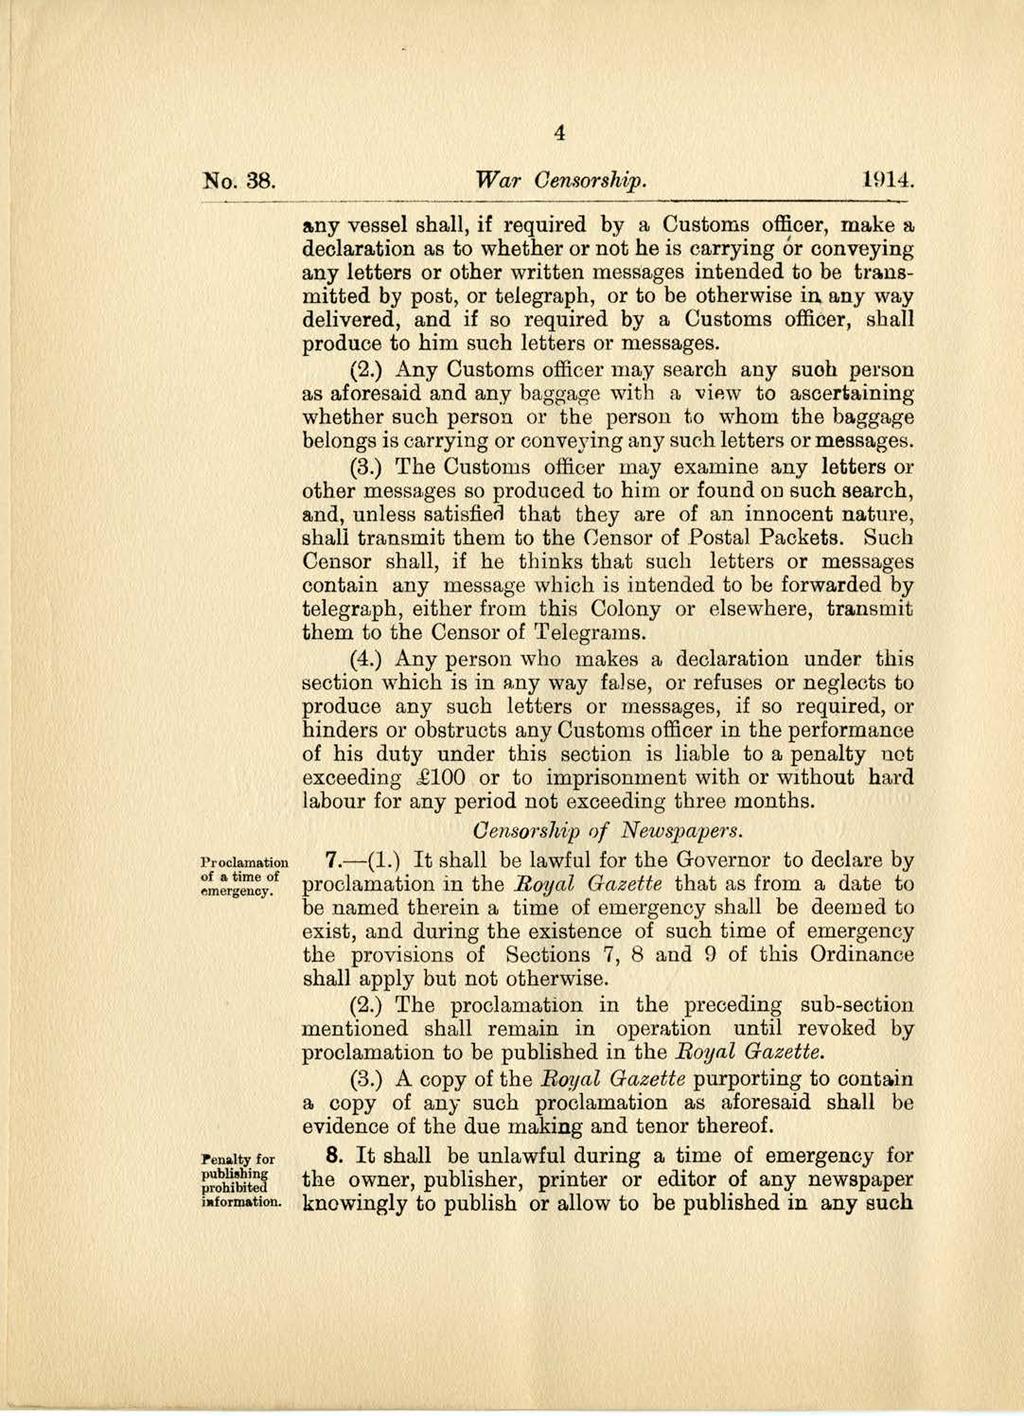 4 No. 38. Proclamation of a time of emergency. Penalty for publishing prohibited informuation. 1914.